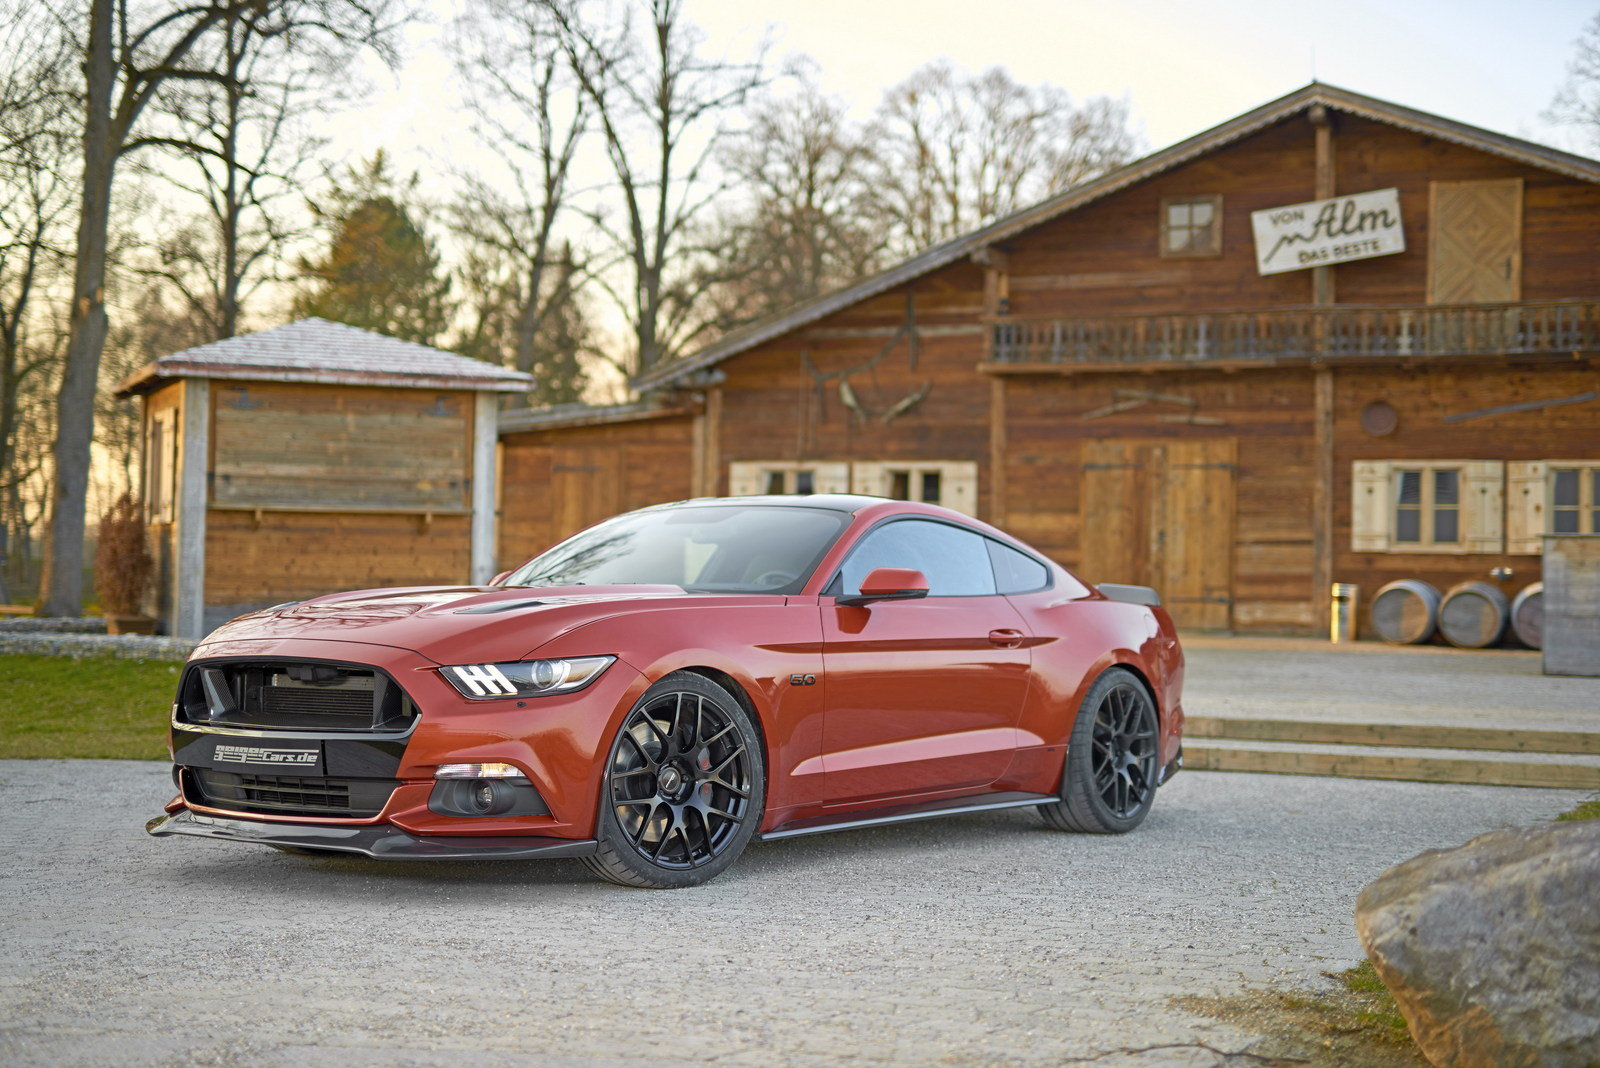 2016 Ford Mustang GT 820 By Geiger Cars - Picture 671406 | car review ...